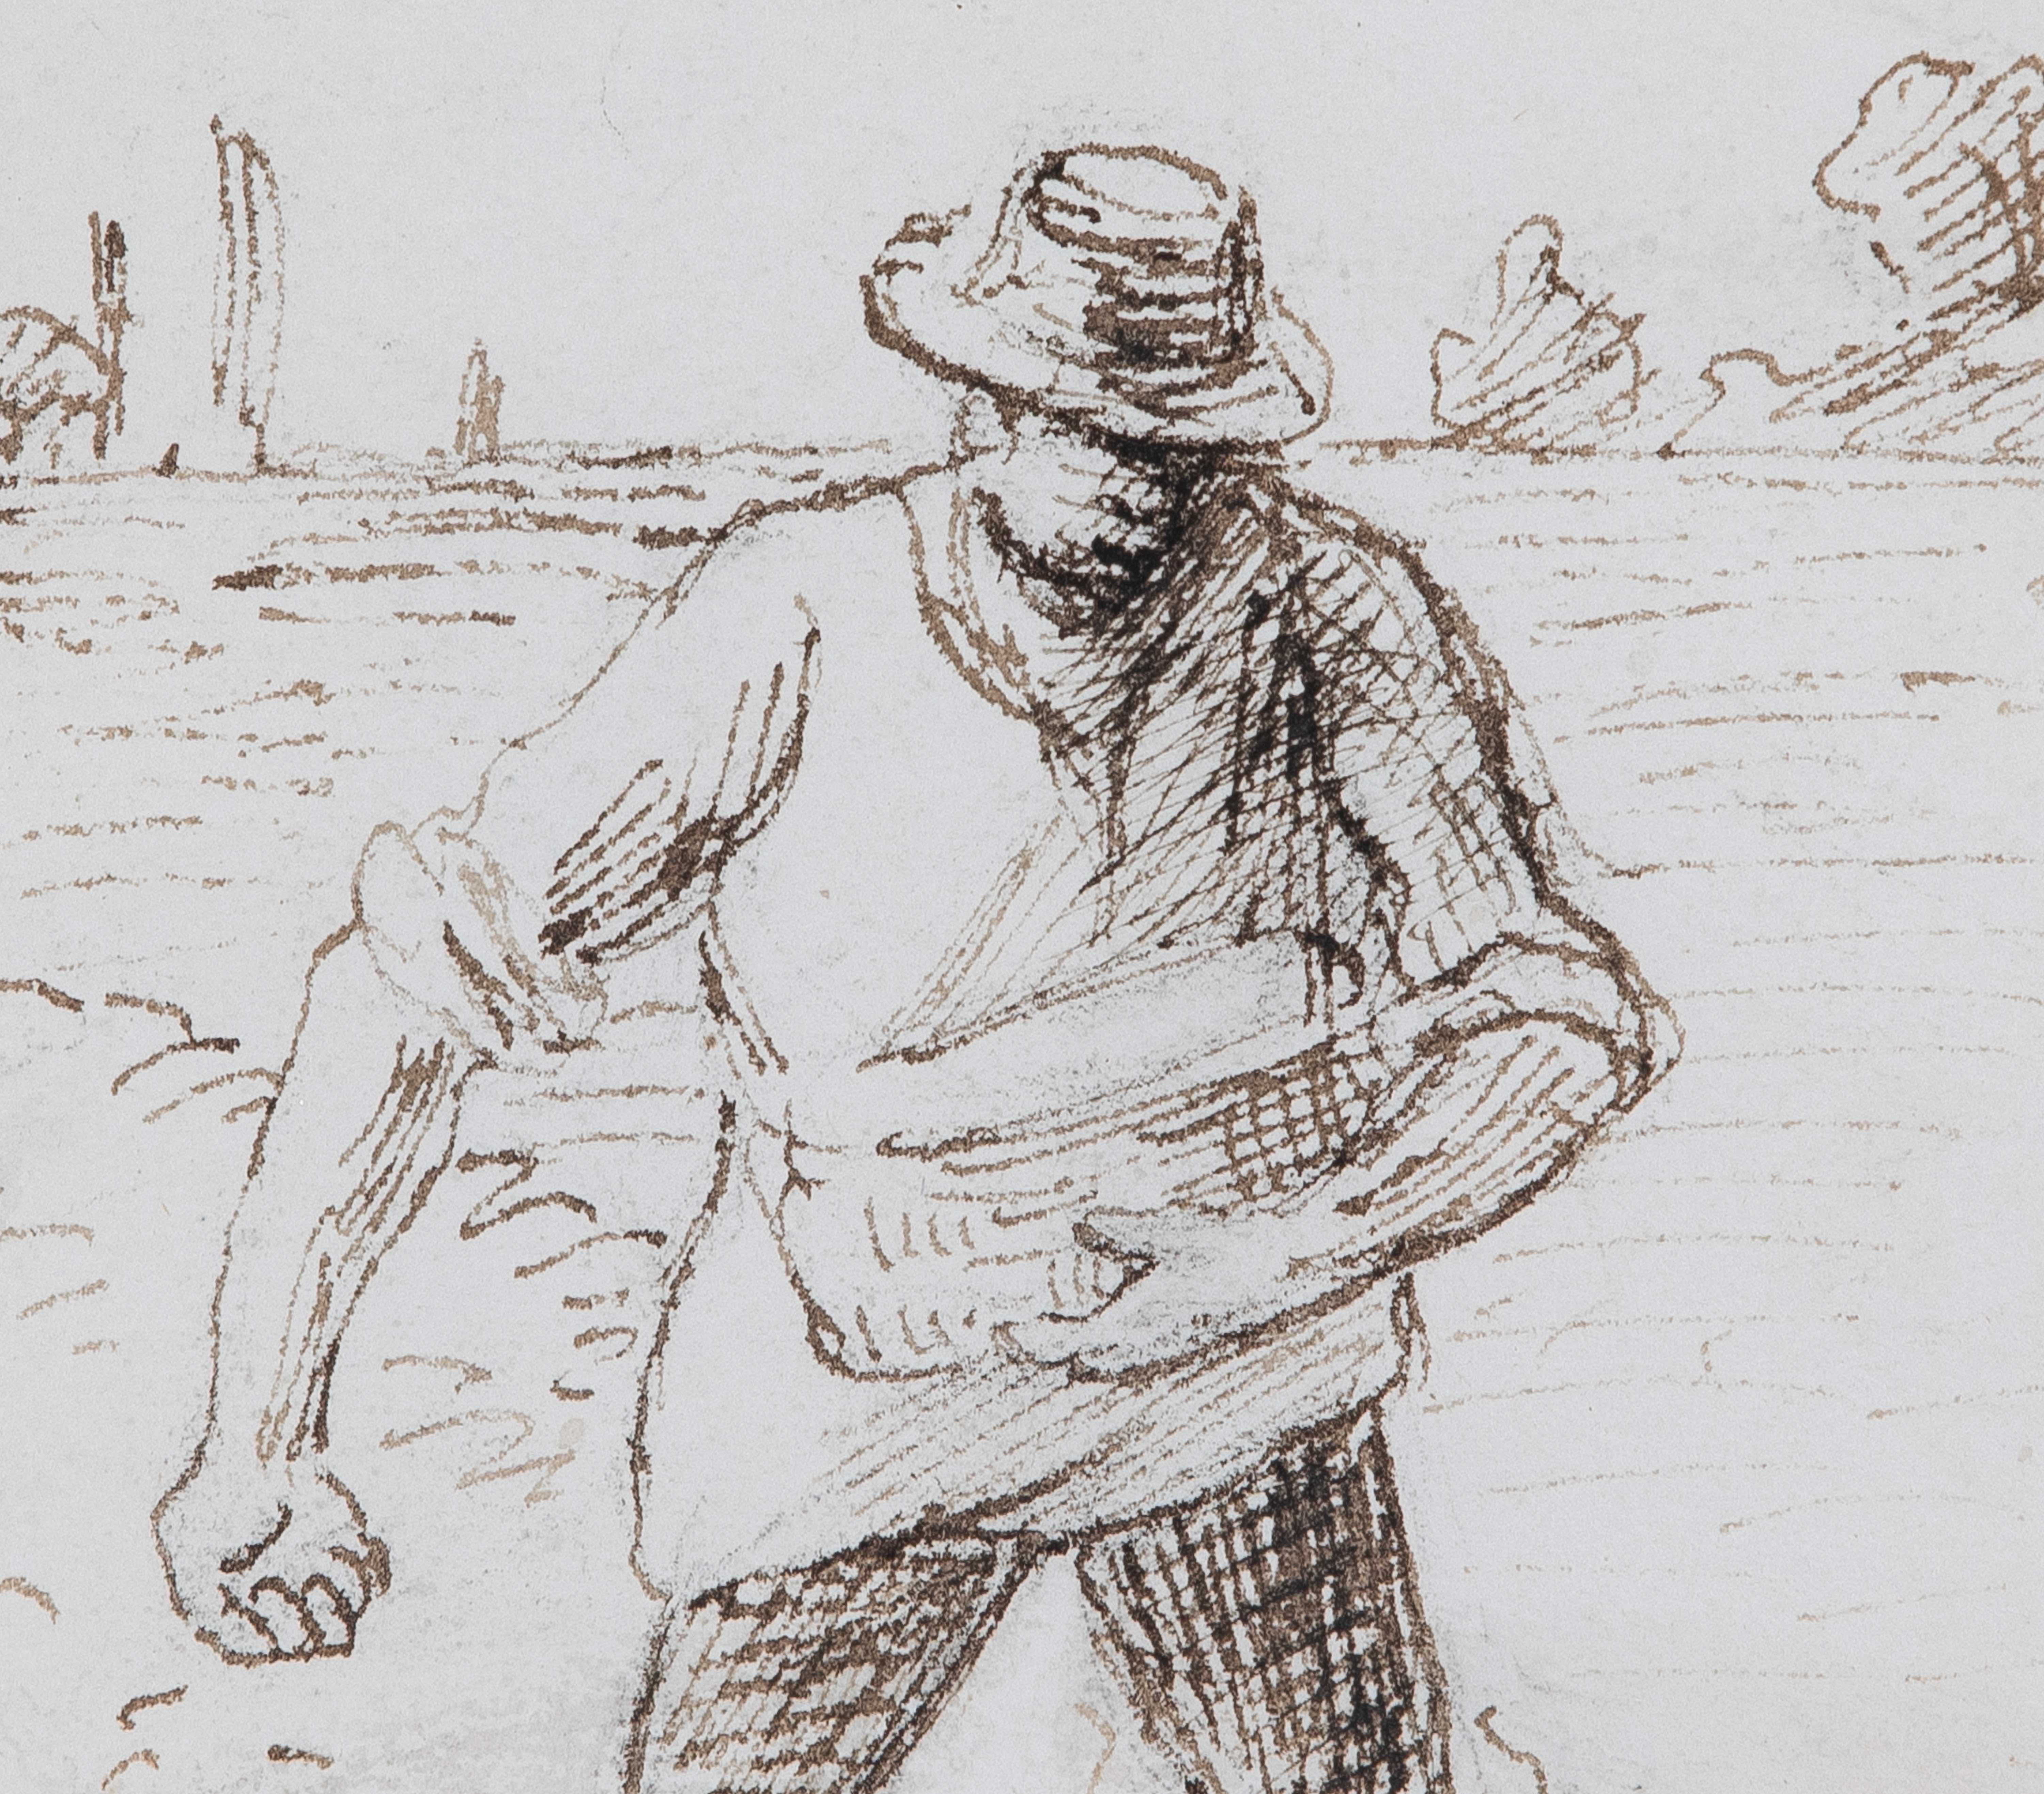 The Sower by Camille Pissarro (1830-1903)
Ink on paper
23 x 16 cm (9 x 6 ⁵/₈ inches)
Stamped lower right, C.P. 

This work is accompanied by a letter of authenticity from Dr. Joachim Pissarro and will be included in the forthcoming Catalogue